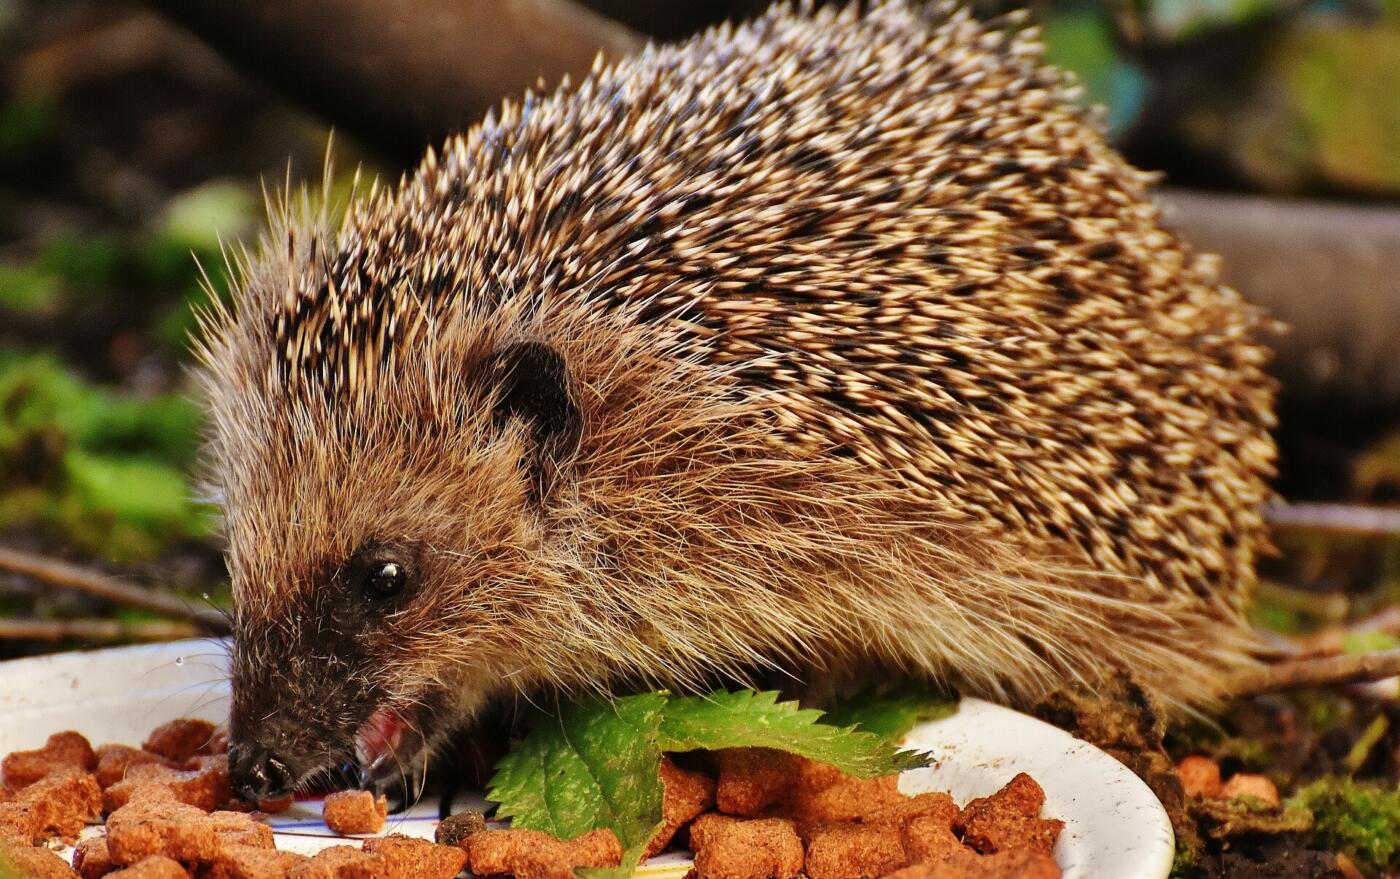 Feeding Hedgehogs in the Garden: A Guide for Animal Lovers